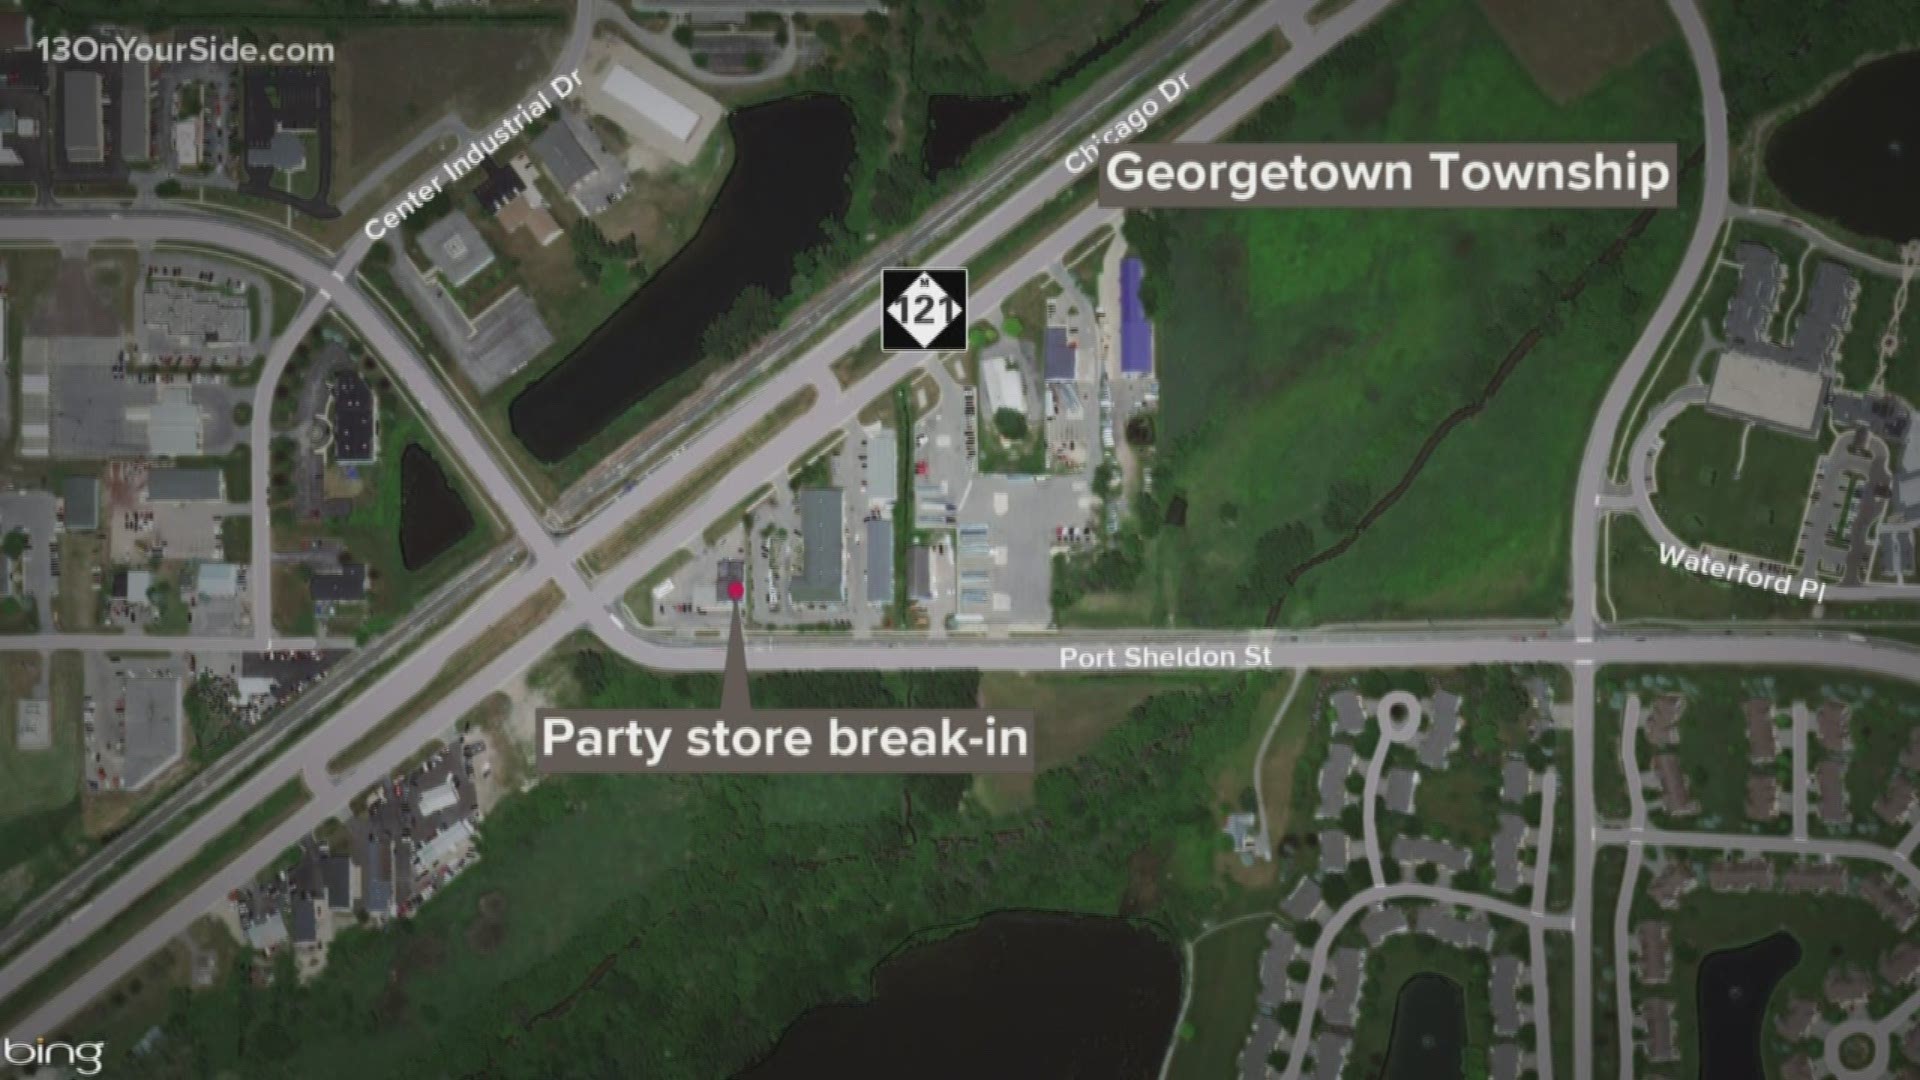 Authorities in Ottawa County are investigating another break-in, this time at a party store. Deputies say thieves smashed a window and made off with cigarettes, alcohol and other small items. They fled the scene just before police arrived.